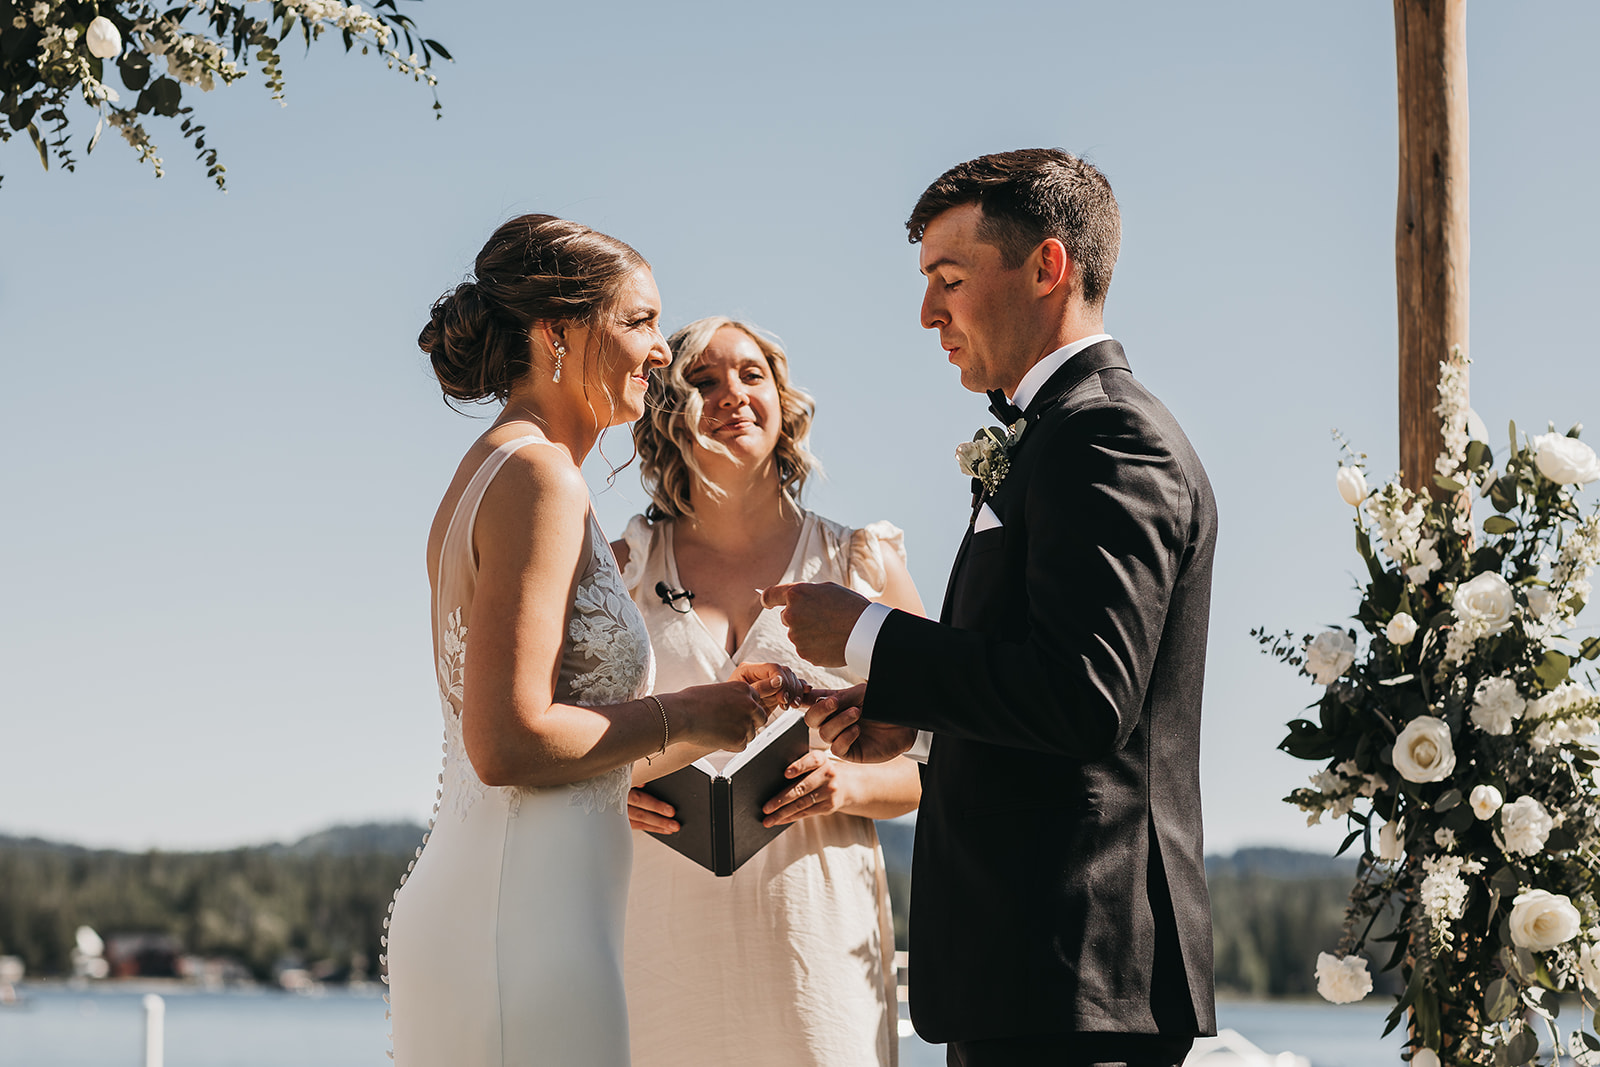 Groom reading his vows to bride during ceremony with lake view at the private family lake house.